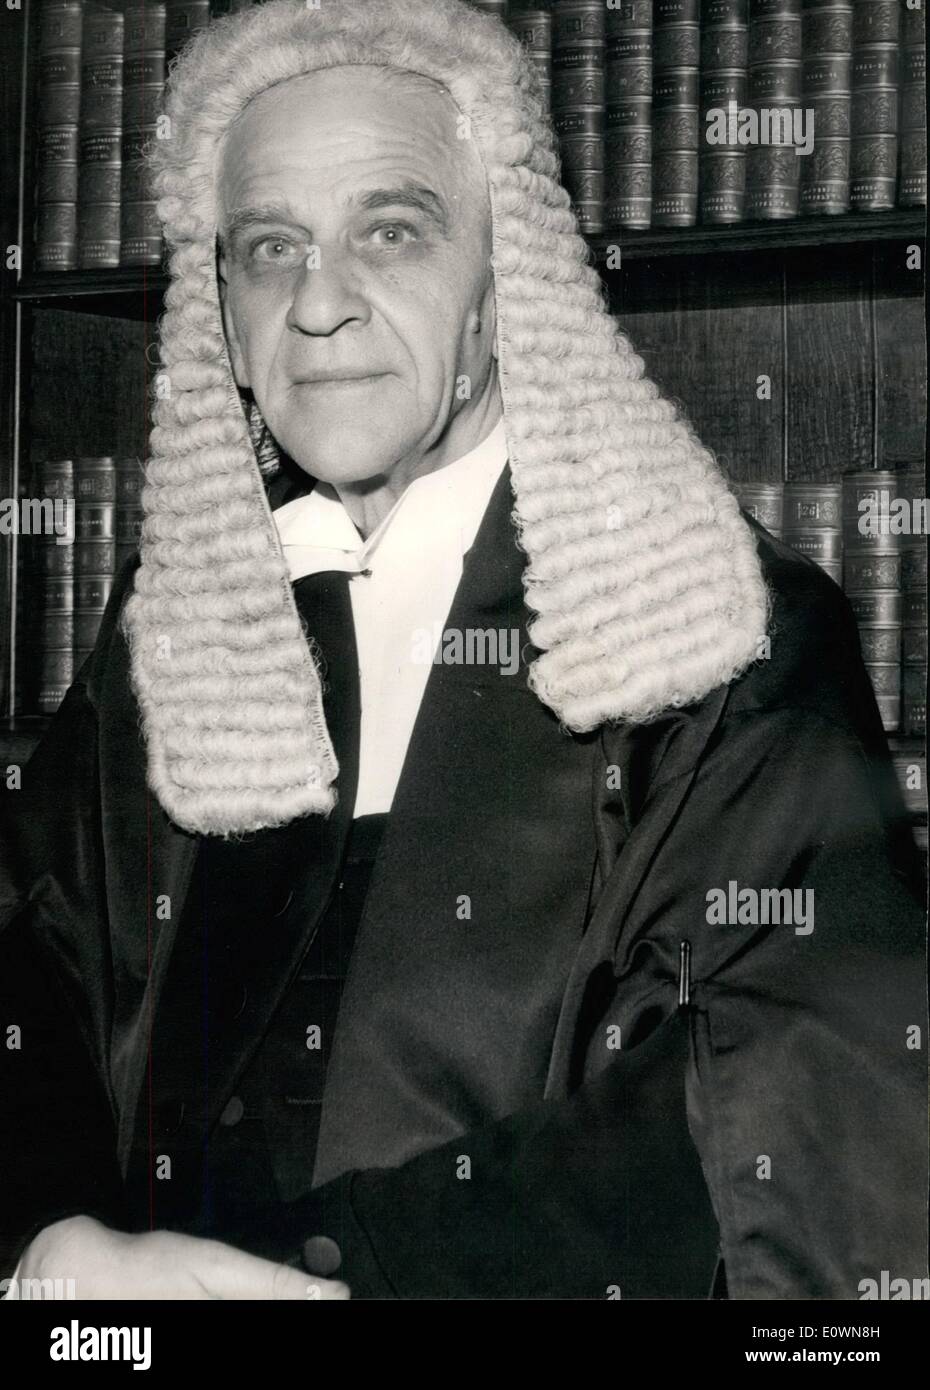 Oct. 10, 1963 - New Speaker Elected. Dr. Horace King, 64, was today elected new Speaker of the House of Commons. Dr. King, the first Labour Speaker, succeeds Sir Harry Hylton Foster, who died in September. Keystone Photo Shows: Dr. Horace King, in his robes, at the House Of Commons today. Stock Photo